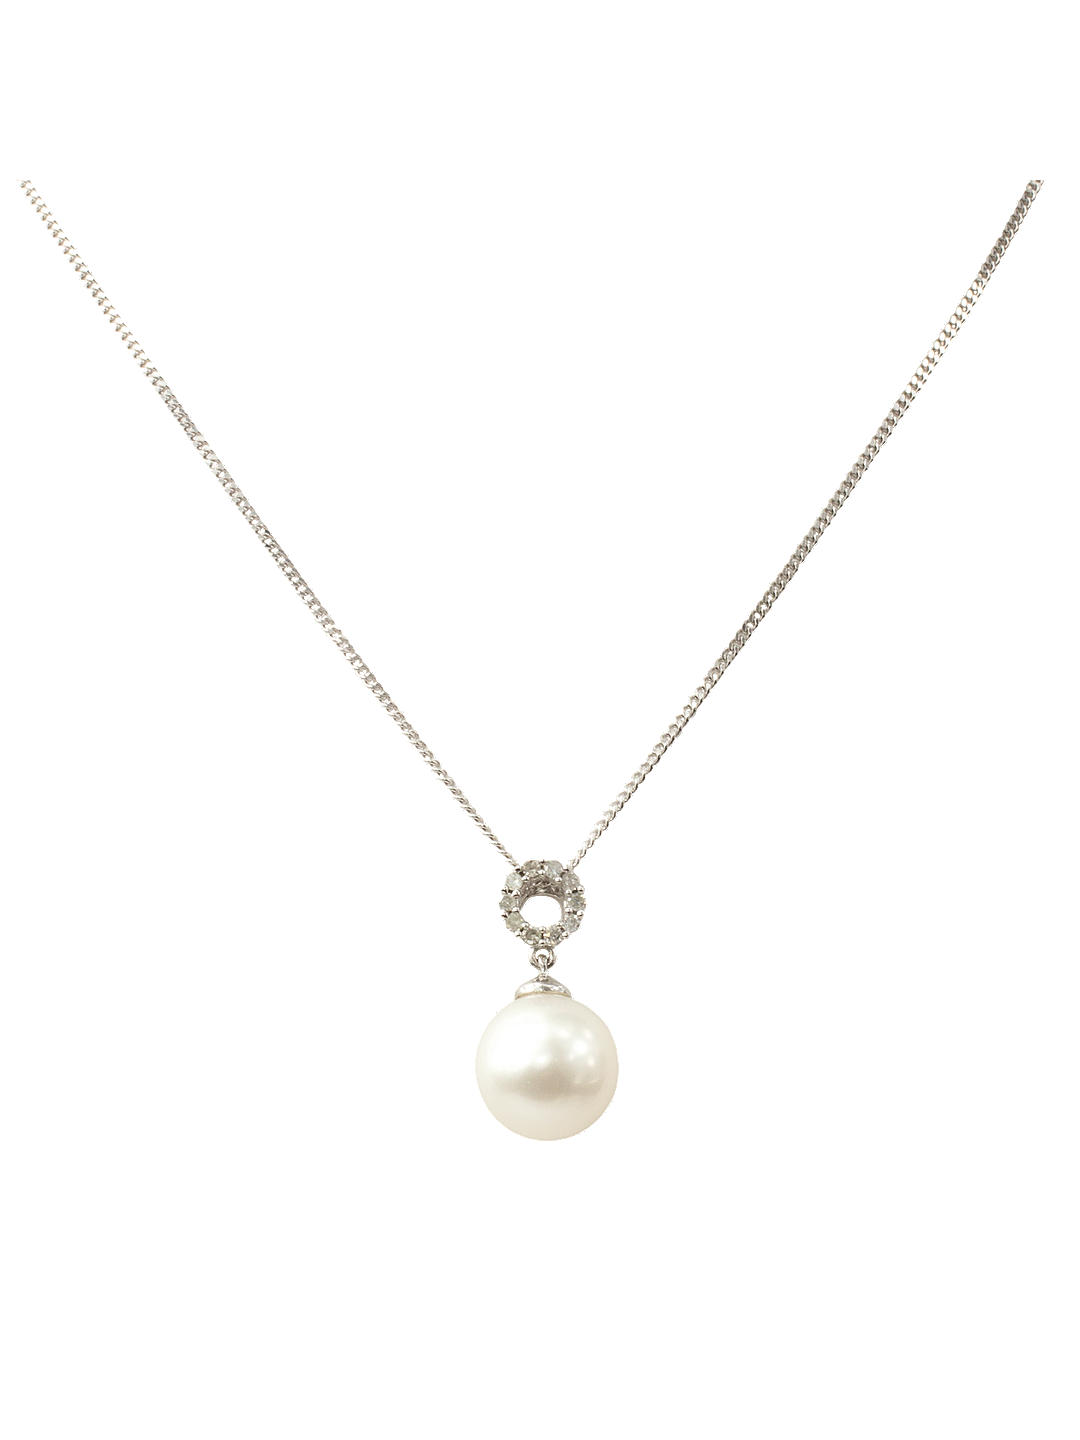 A B Davis Diamond And Pearl Loop Pendant Necklace, White Gold